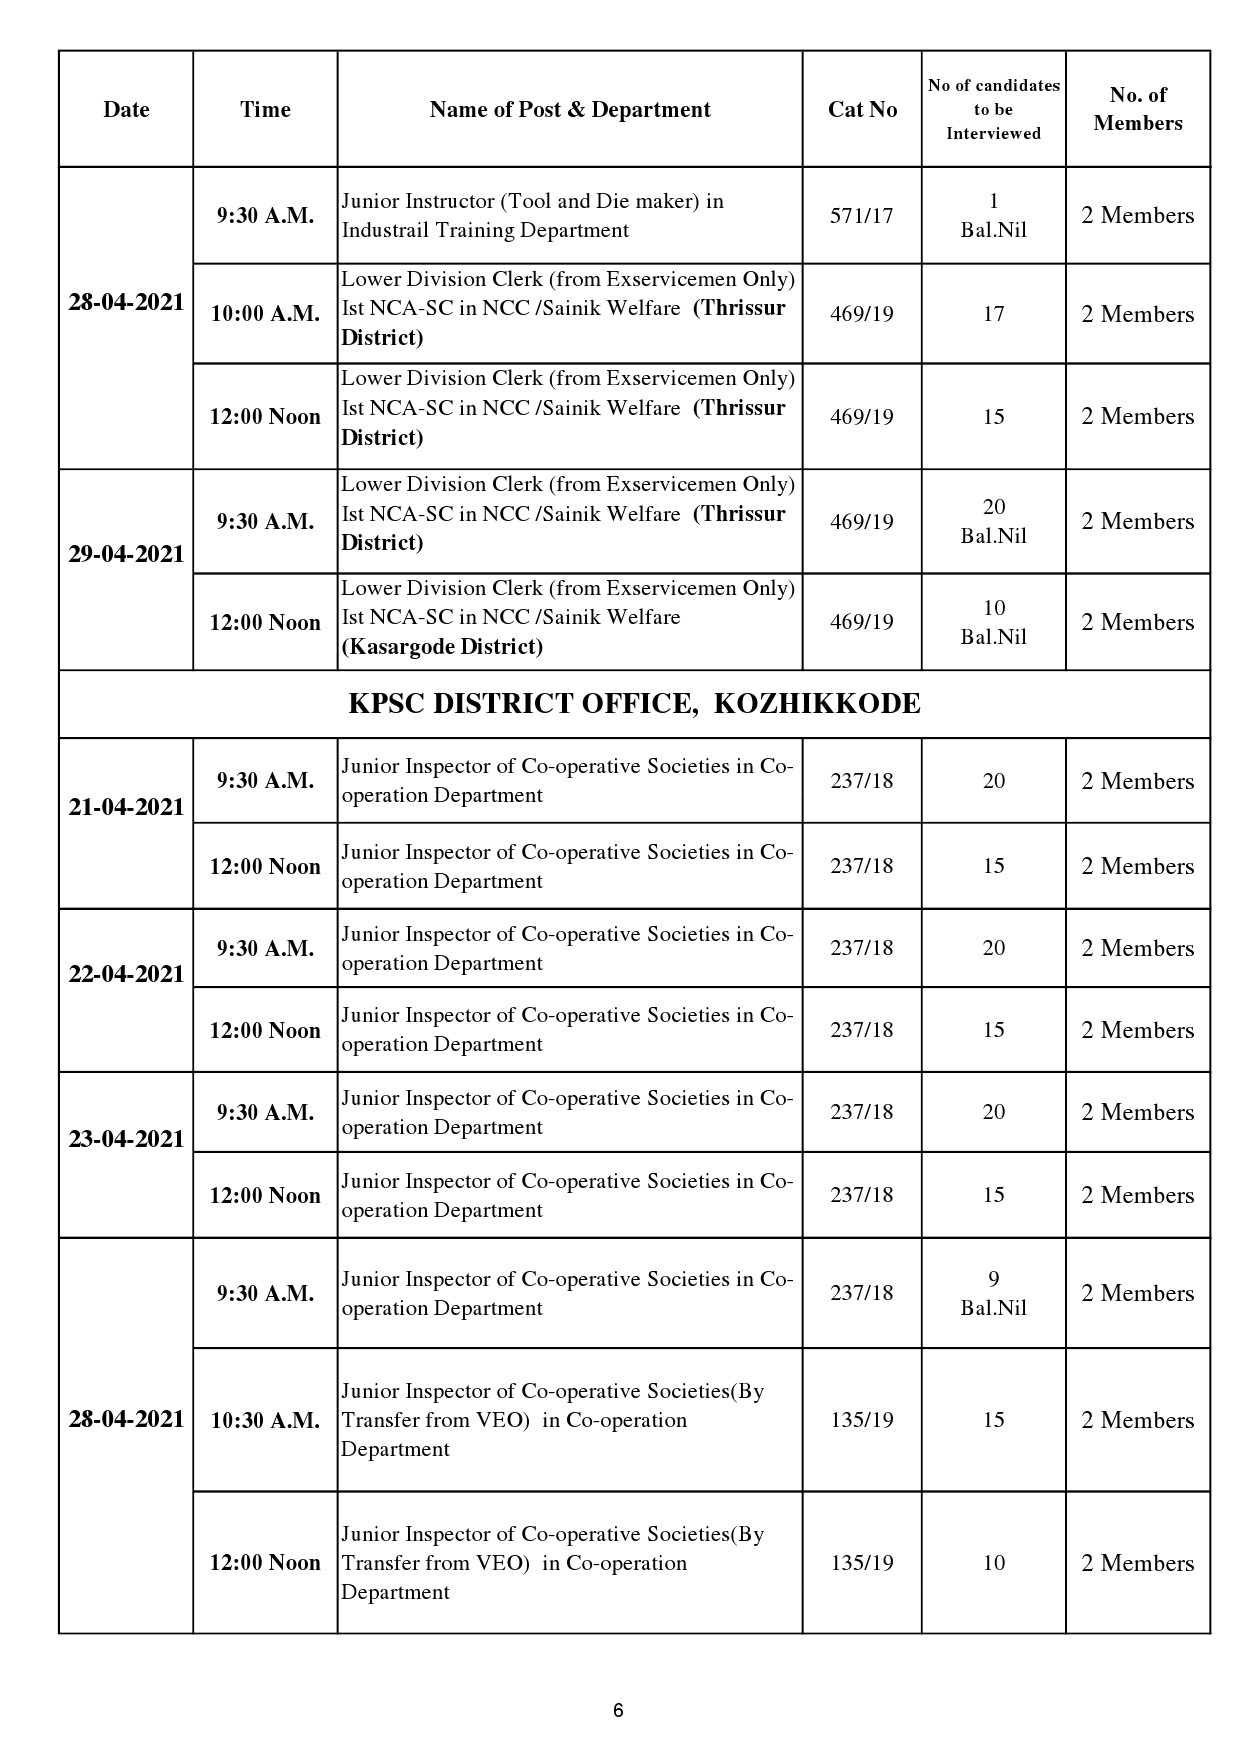 REVISED INTERVIEW PROGRAMME FOR THE MONTH OF APRIL 2021 - Notification Image 6